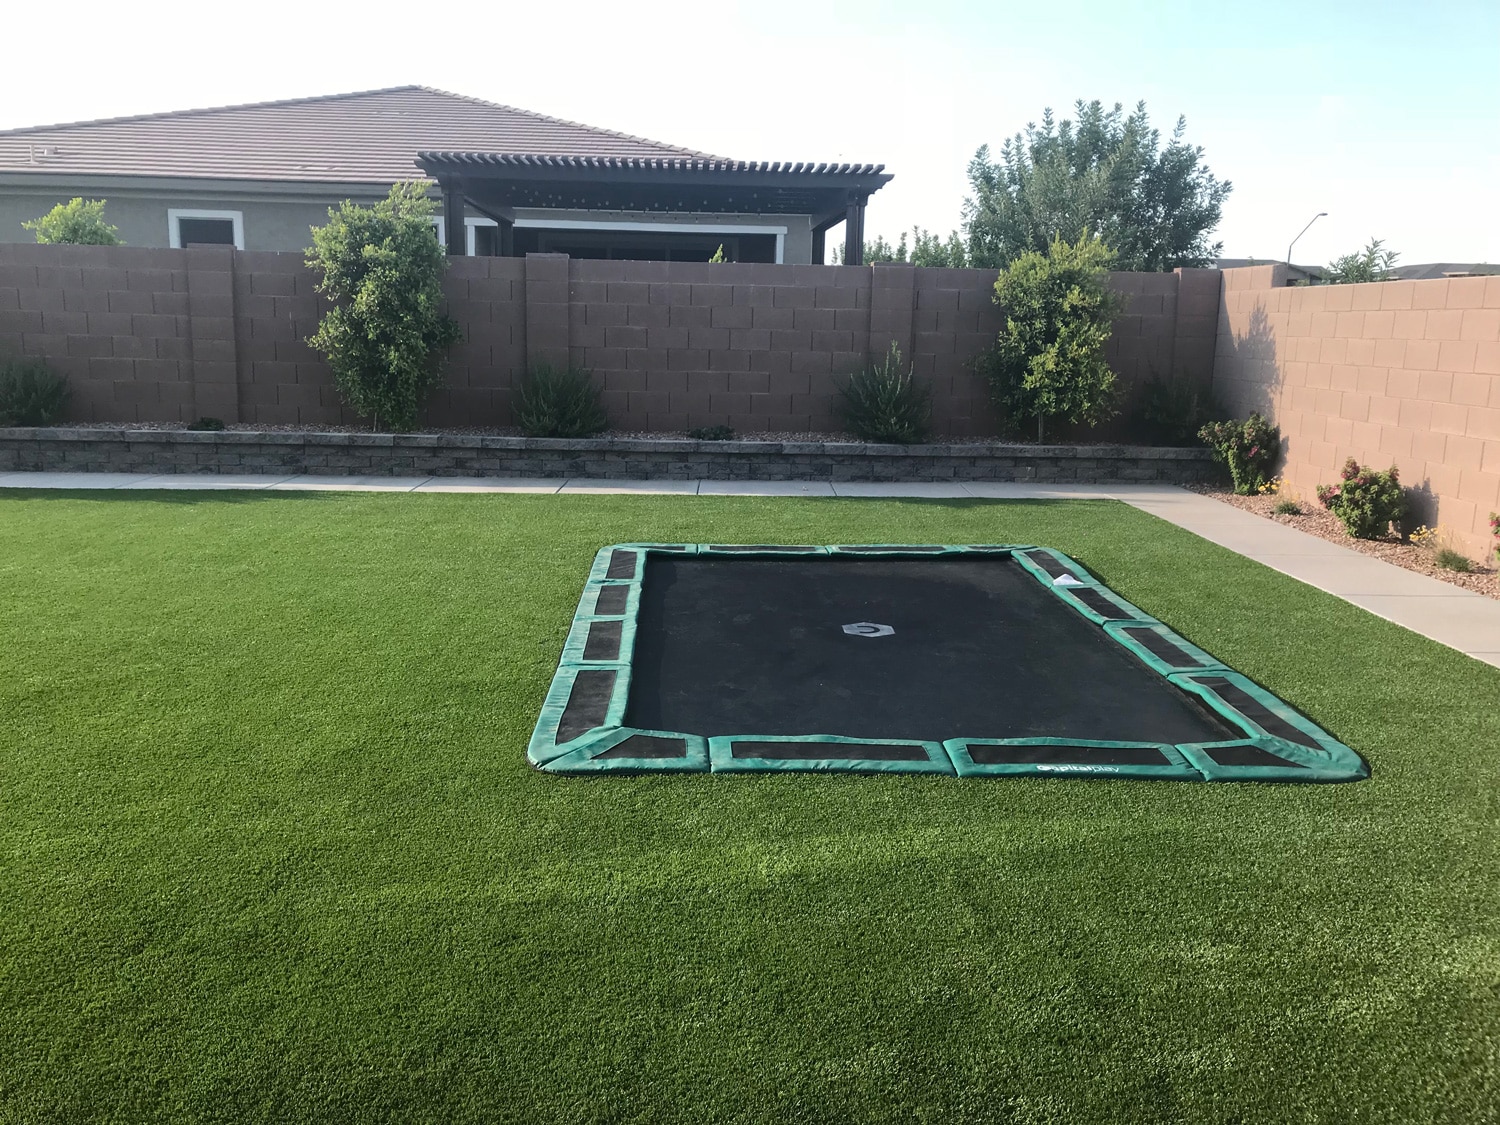 Patio green in-ground trampoline completed by Capital Play